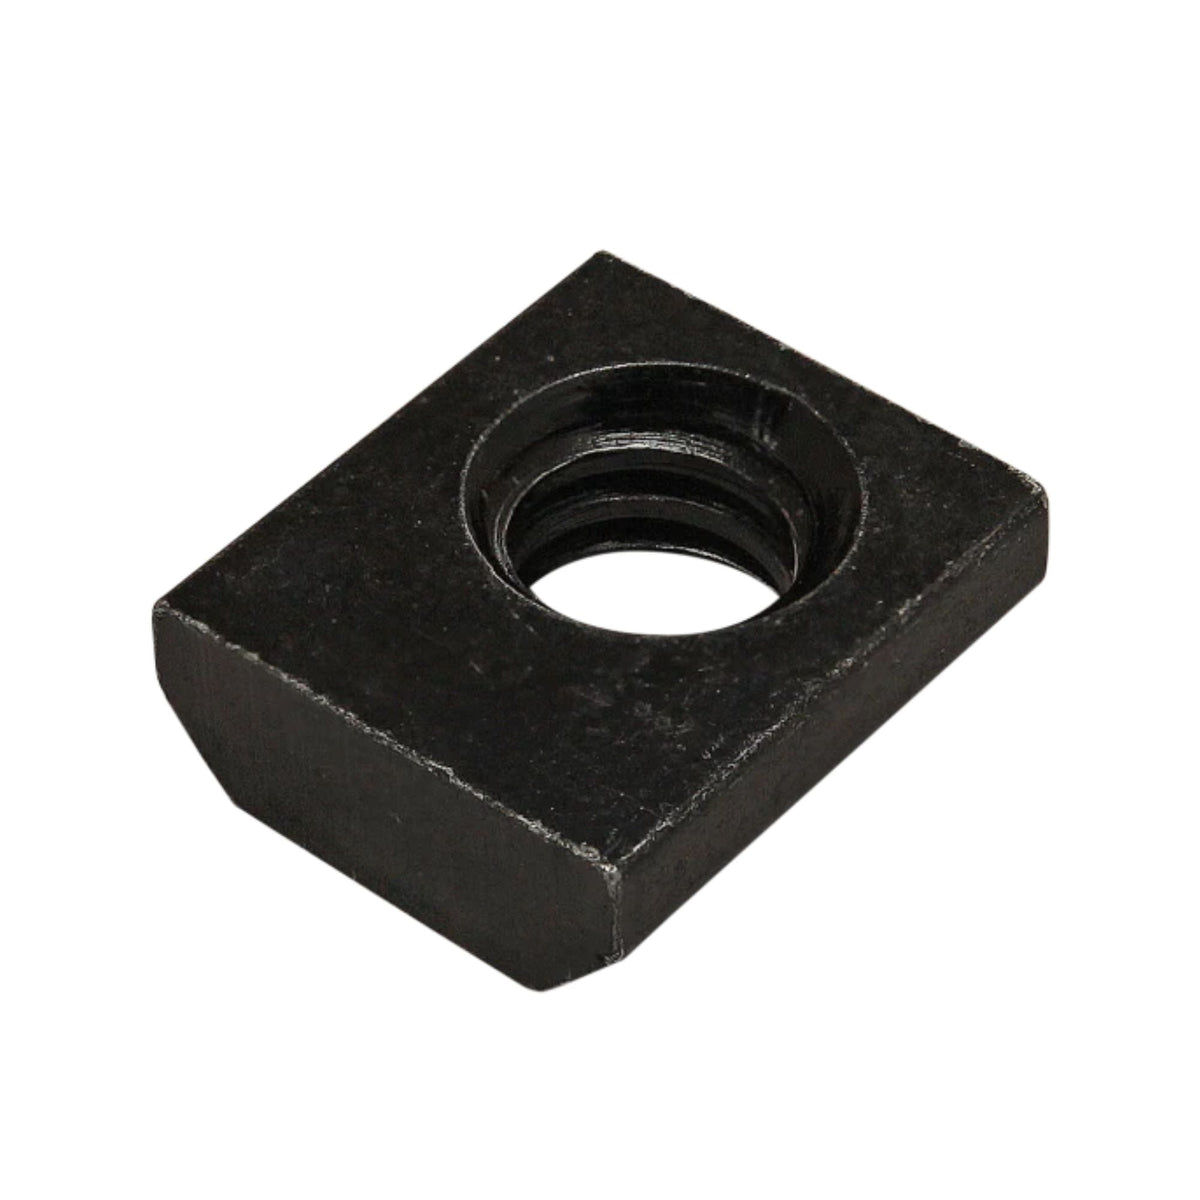 rectangle shaped t-nut with a rounded bottom, flat top, with a hole on the top right side